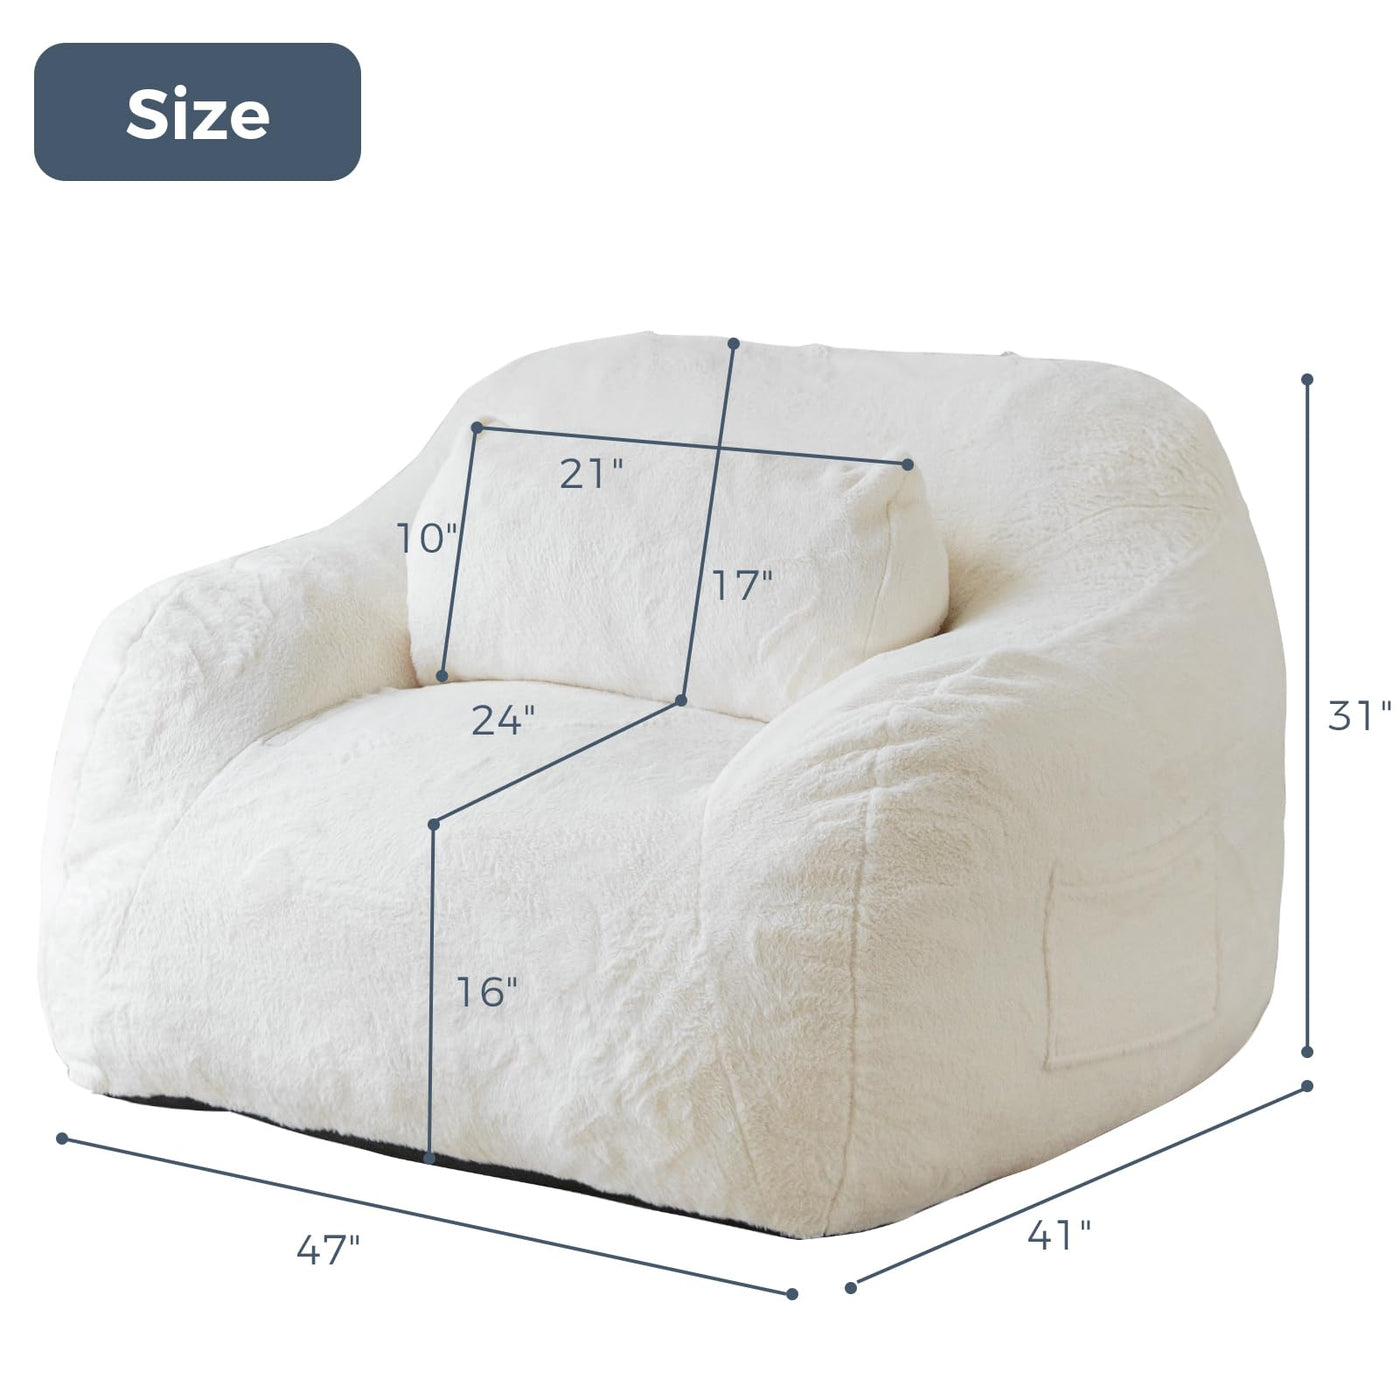 MAXYOYO Giant Bean Bag Chair with Pillow, Faux Fur Fabric Fluffy Large Bean Bag Chair Couch for Reading and Gaming, Beige